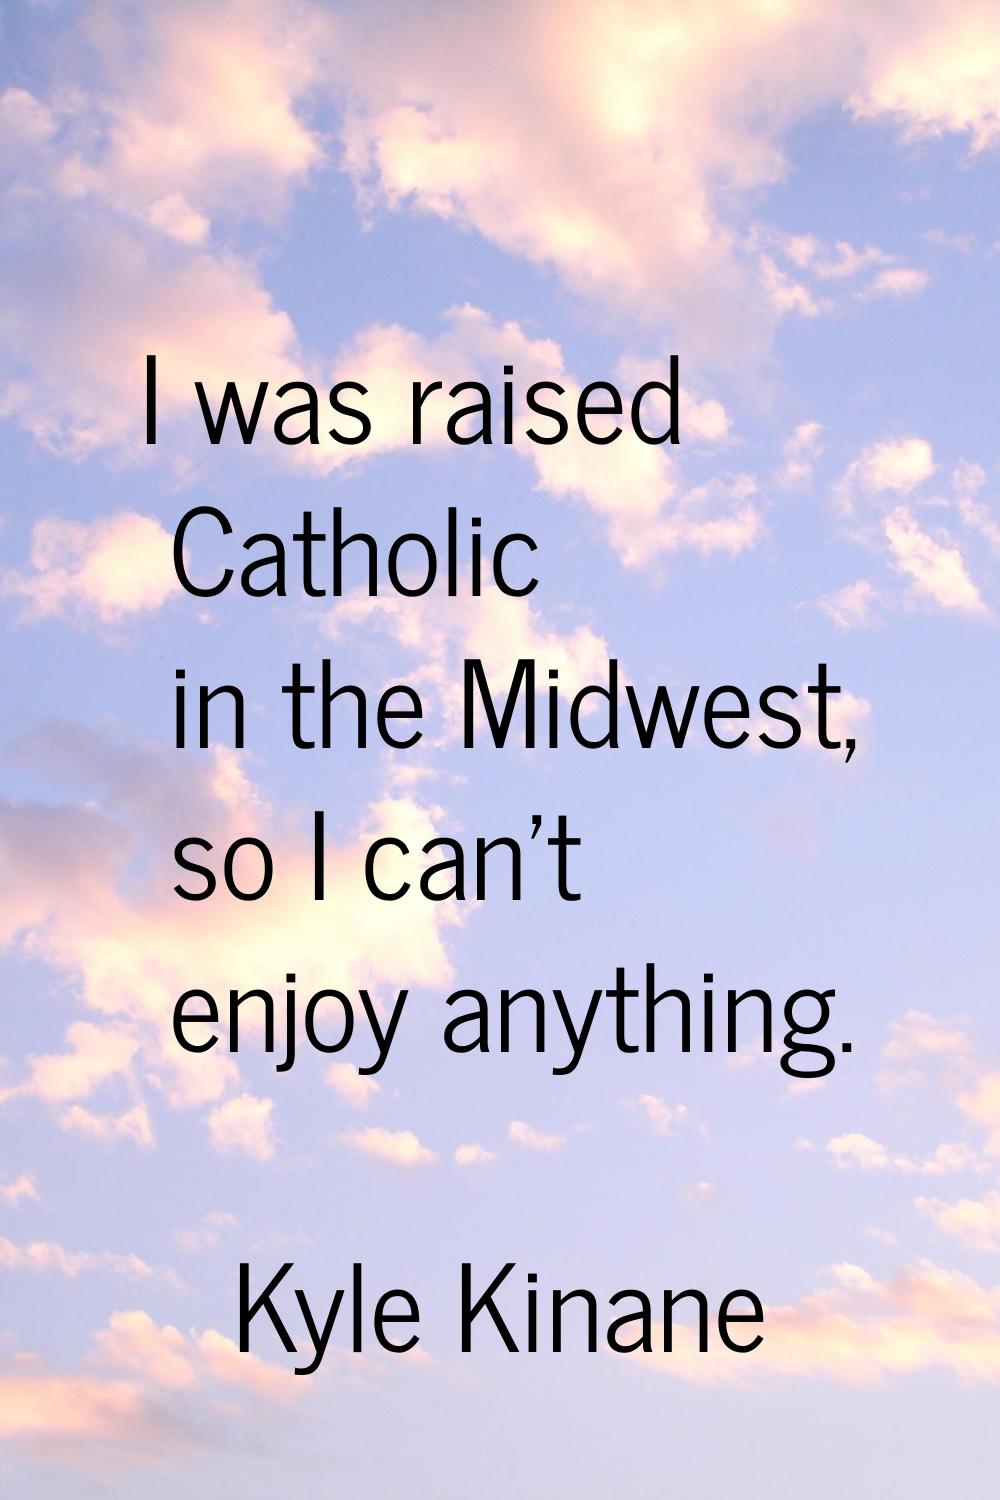 I was raised Catholic in the Midwest, so I can't enjoy anything.